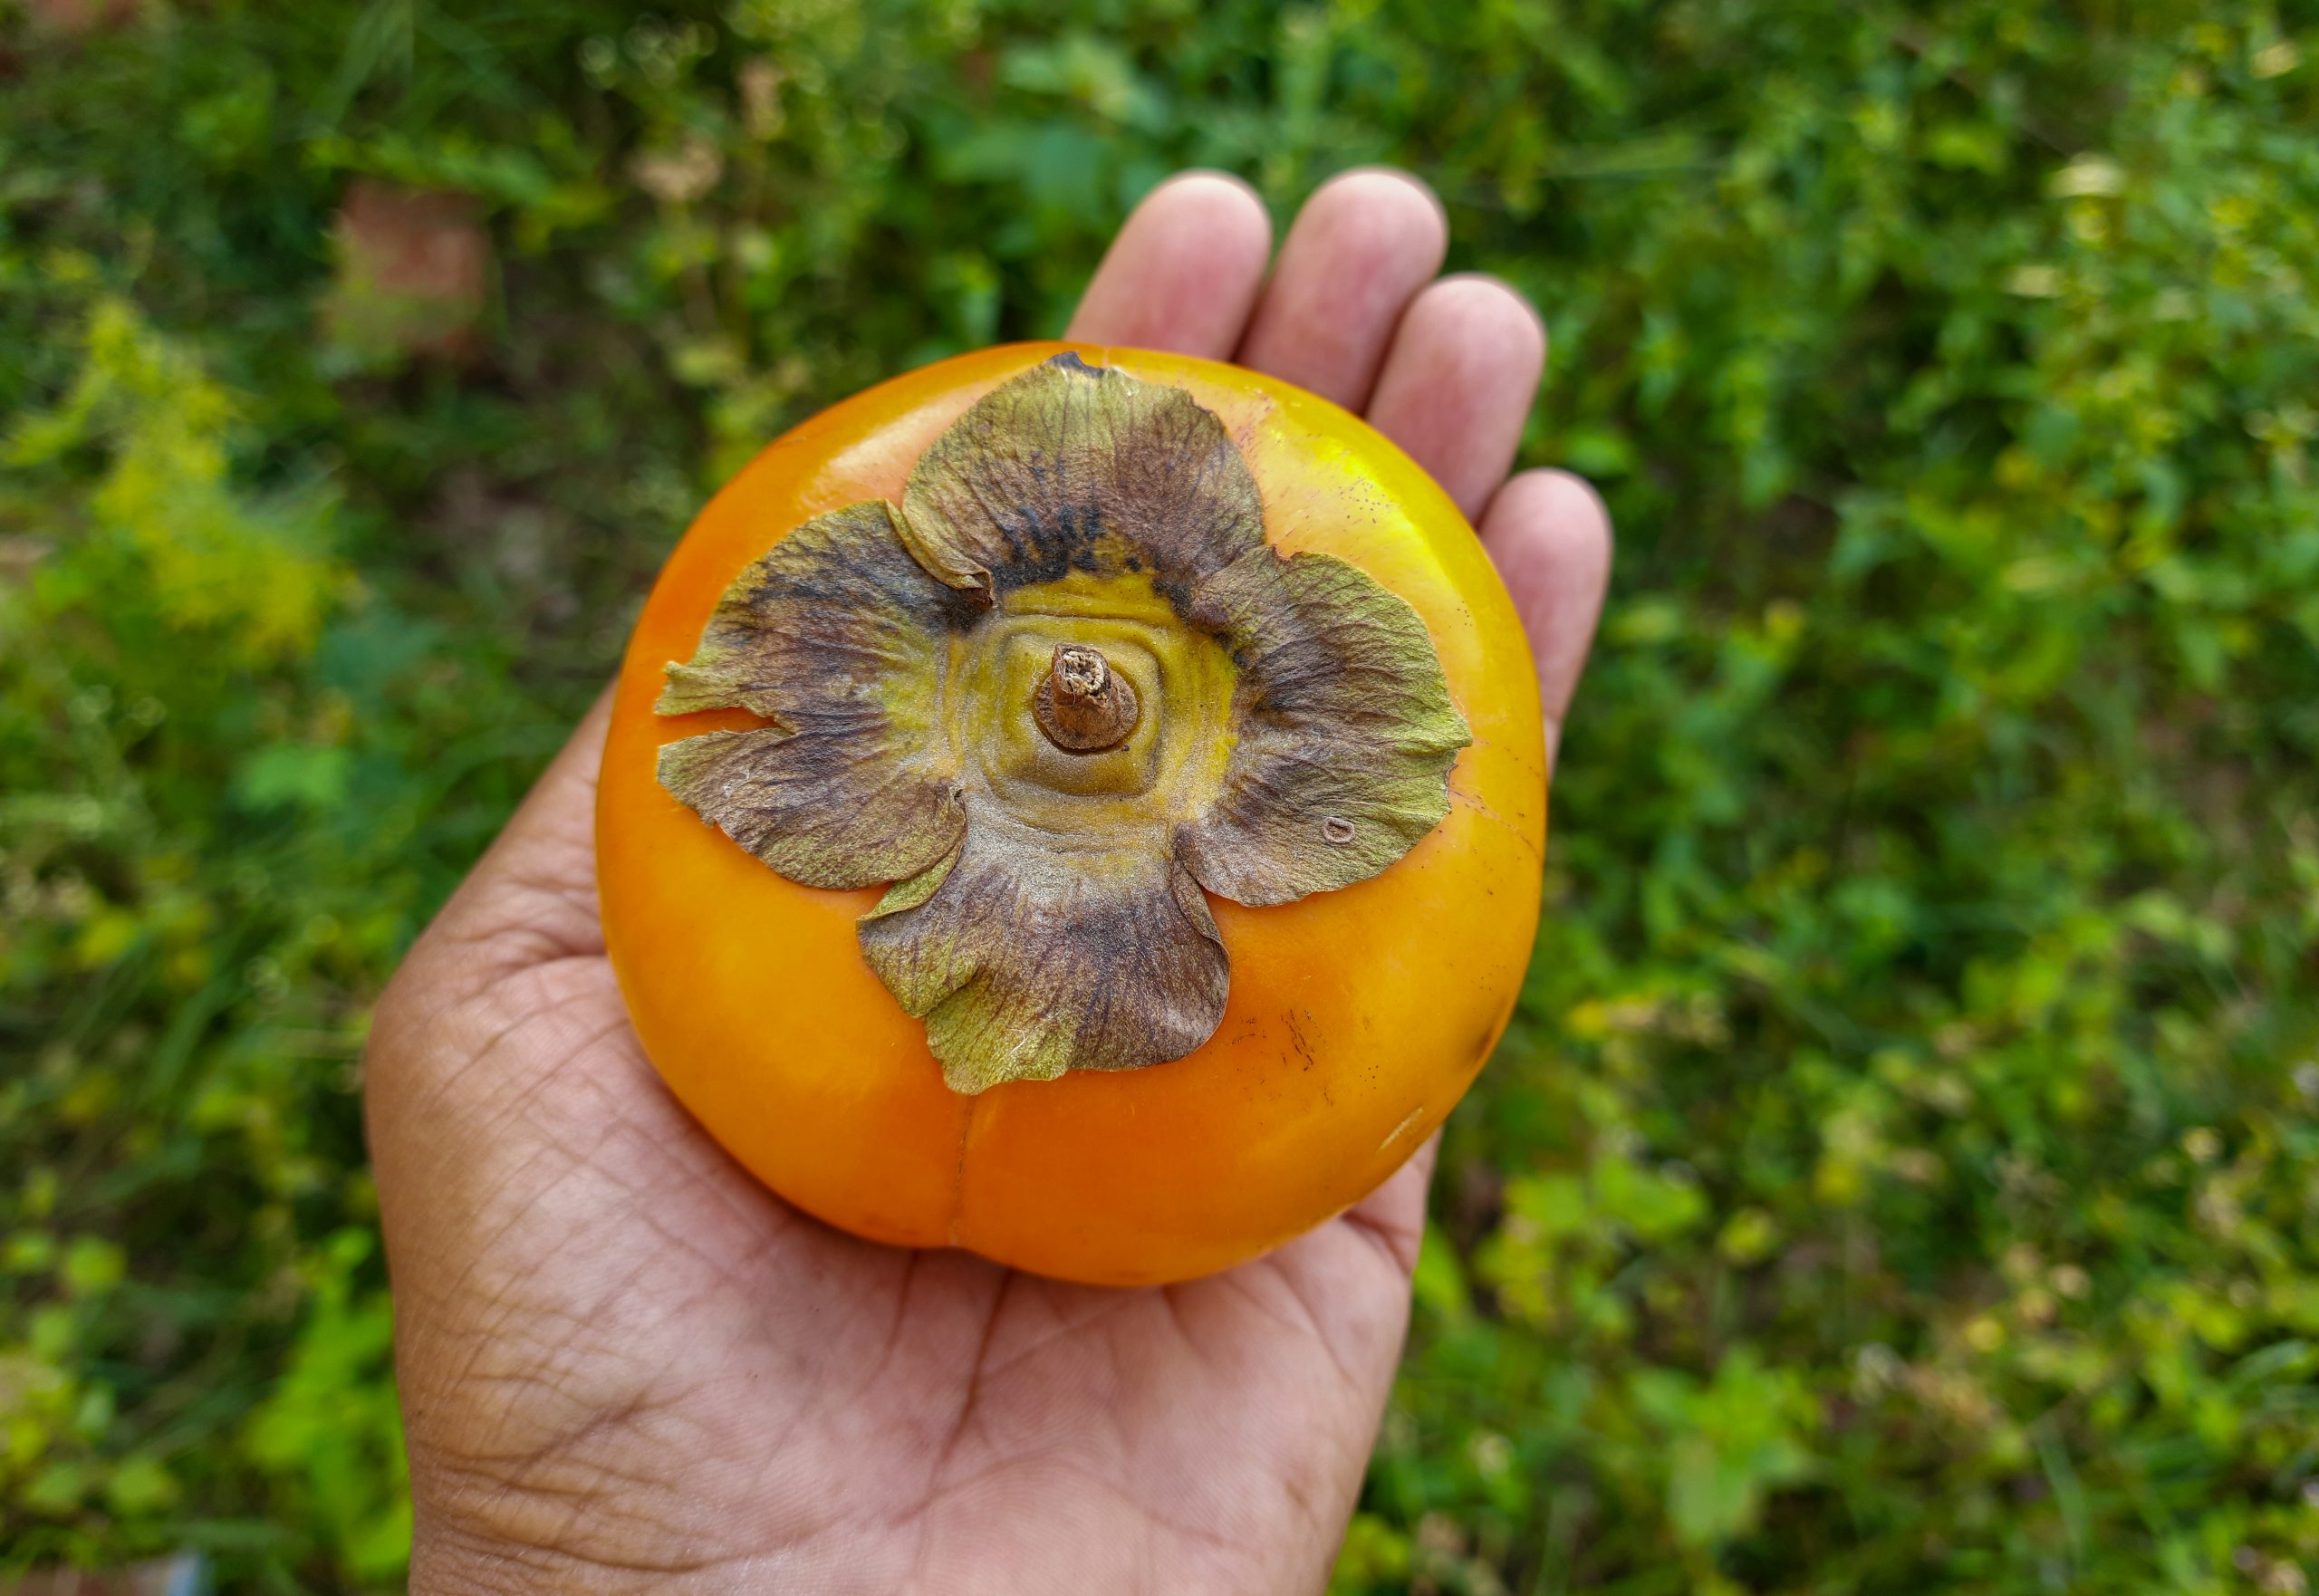 A Persimmon on hand